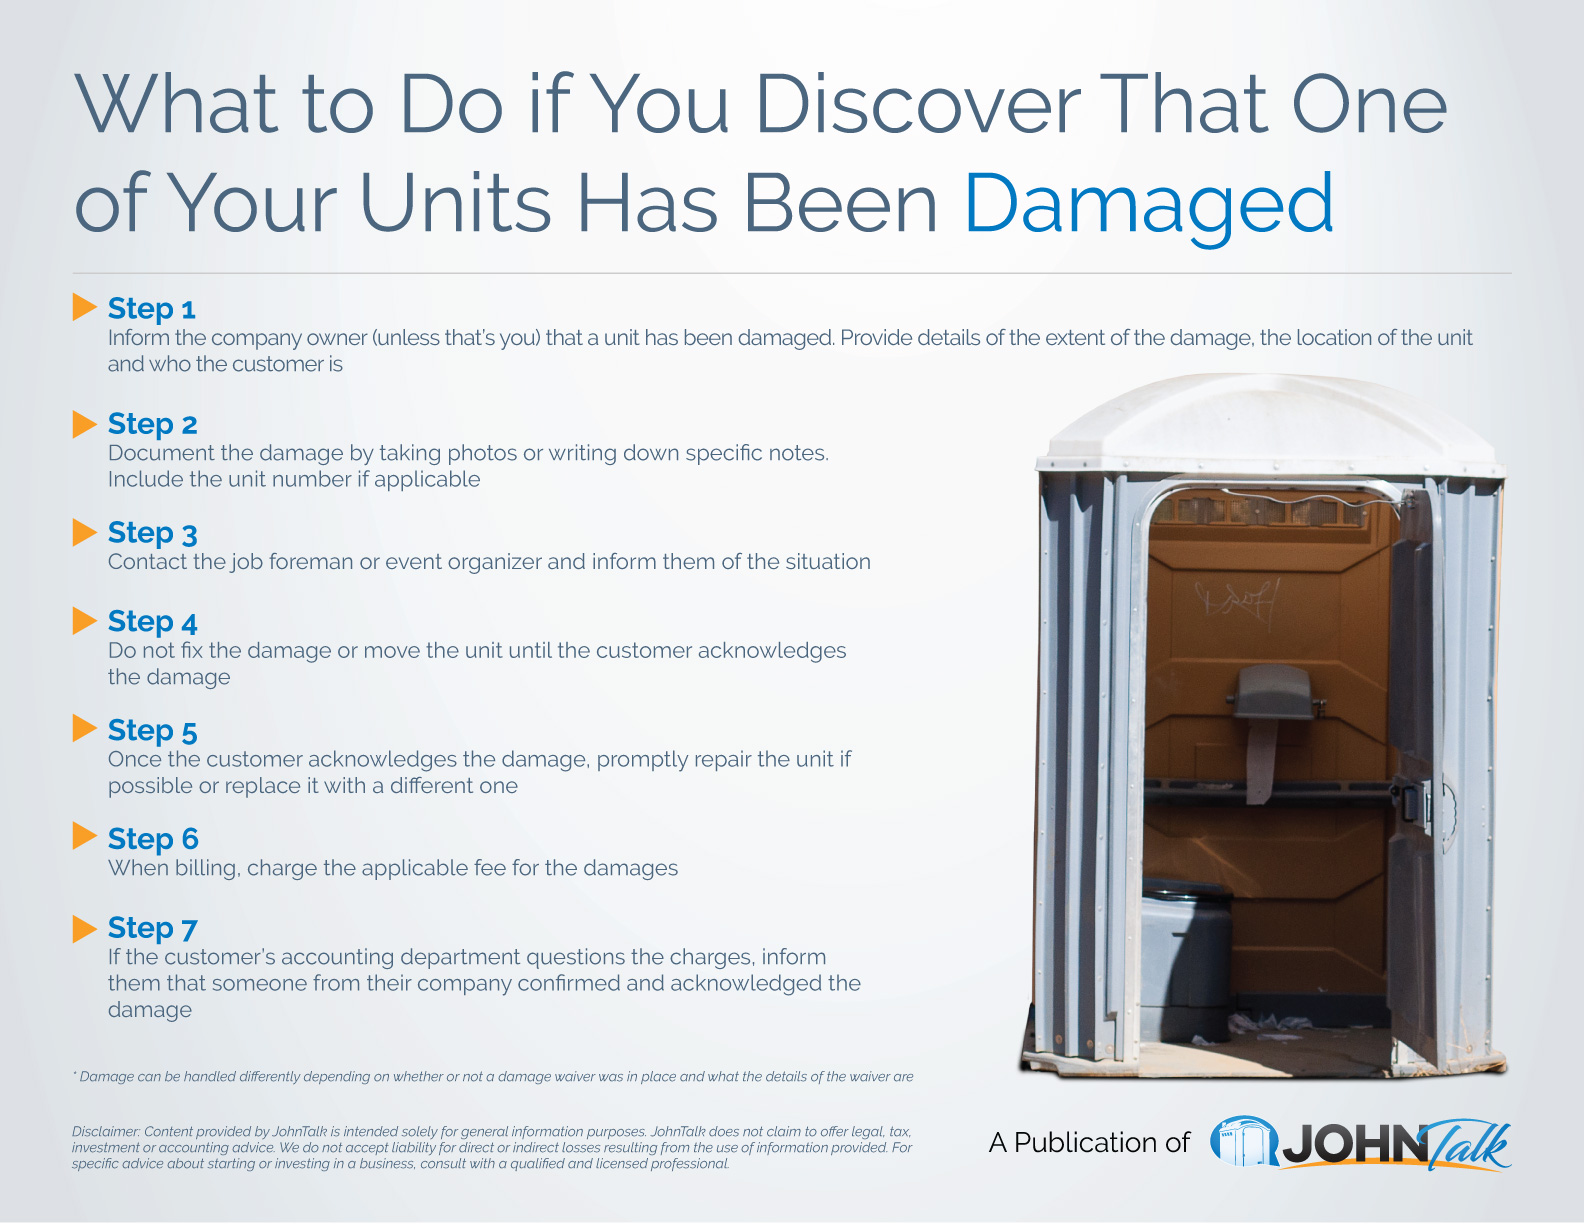 What to Do if One of Your Units Has Been Damaged